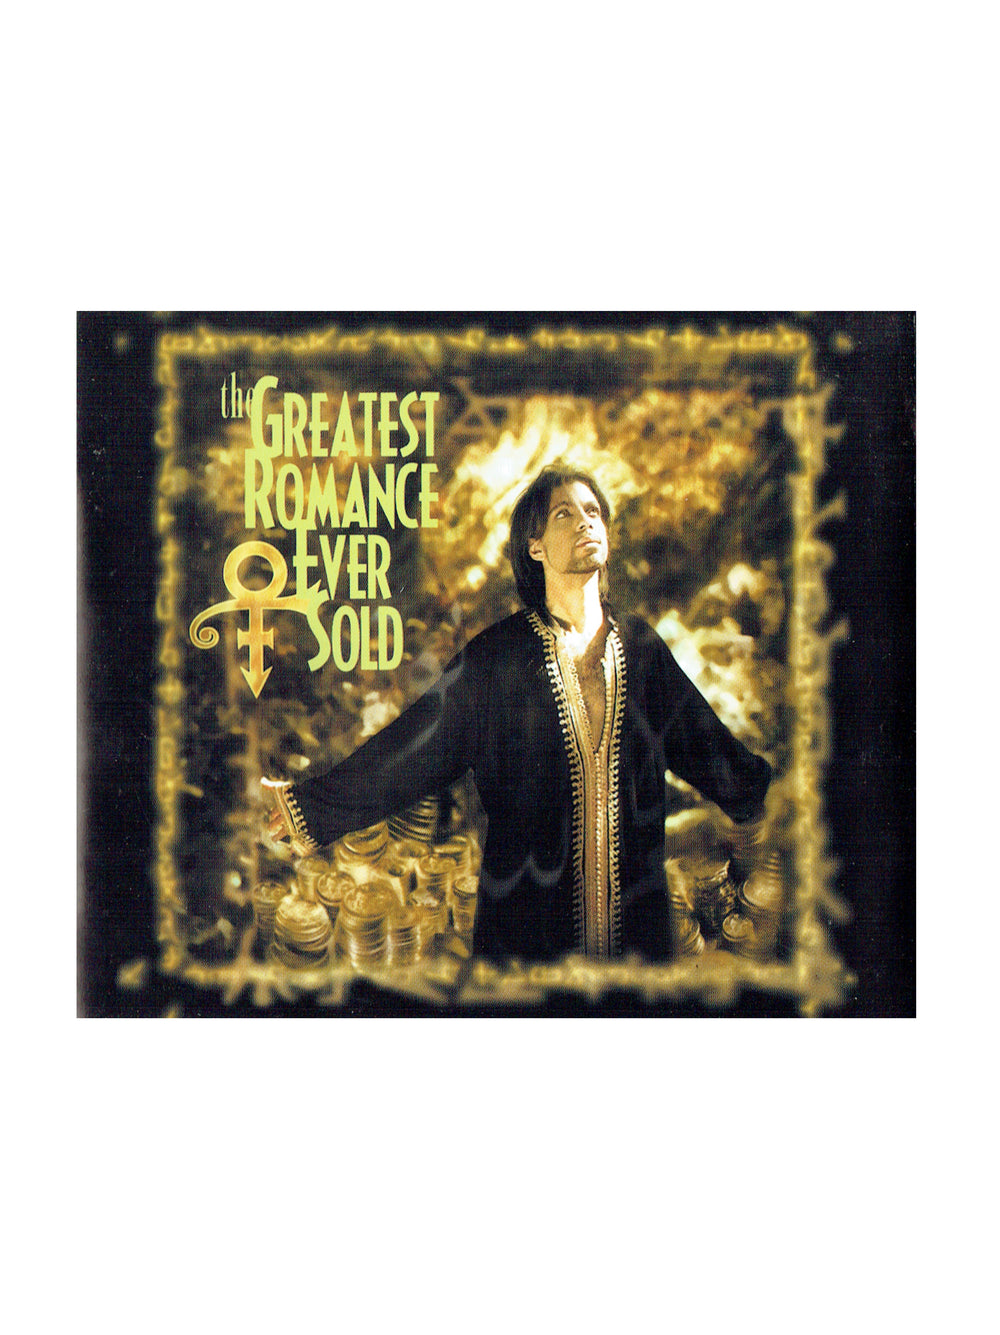 Prince The Greatest Romance Ever Sold CD Single 4 Tracks